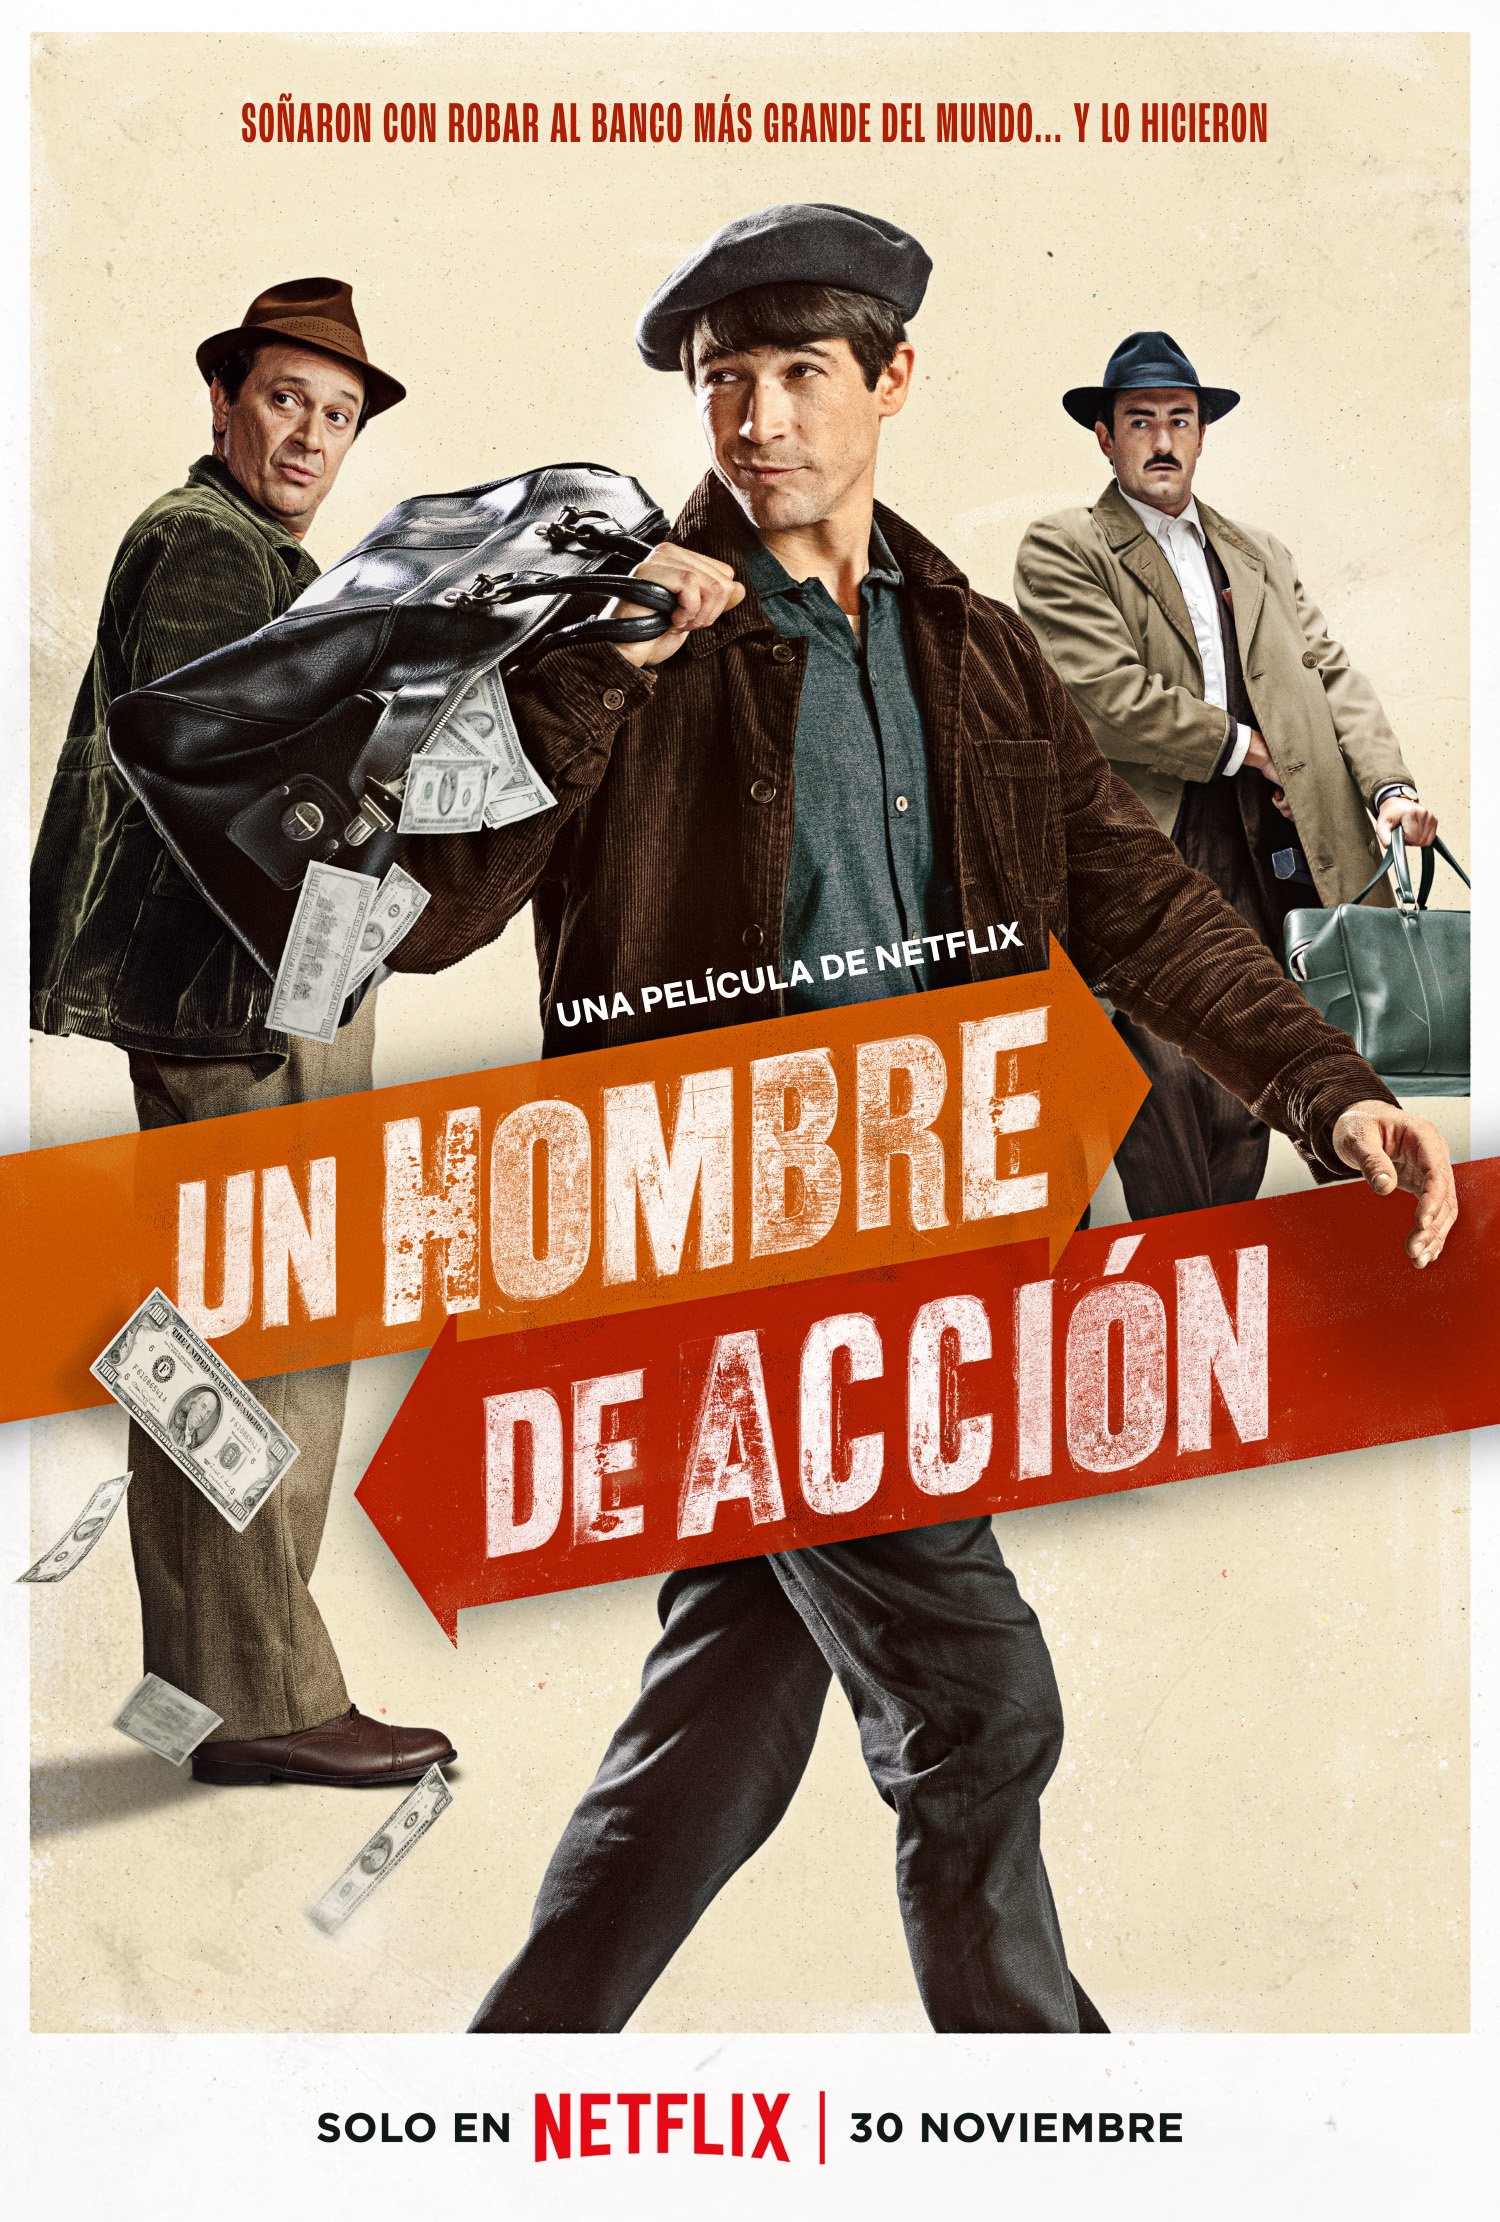 A Man of Action 2022 English 1080p NF HDRip MSub 1.3GB Download